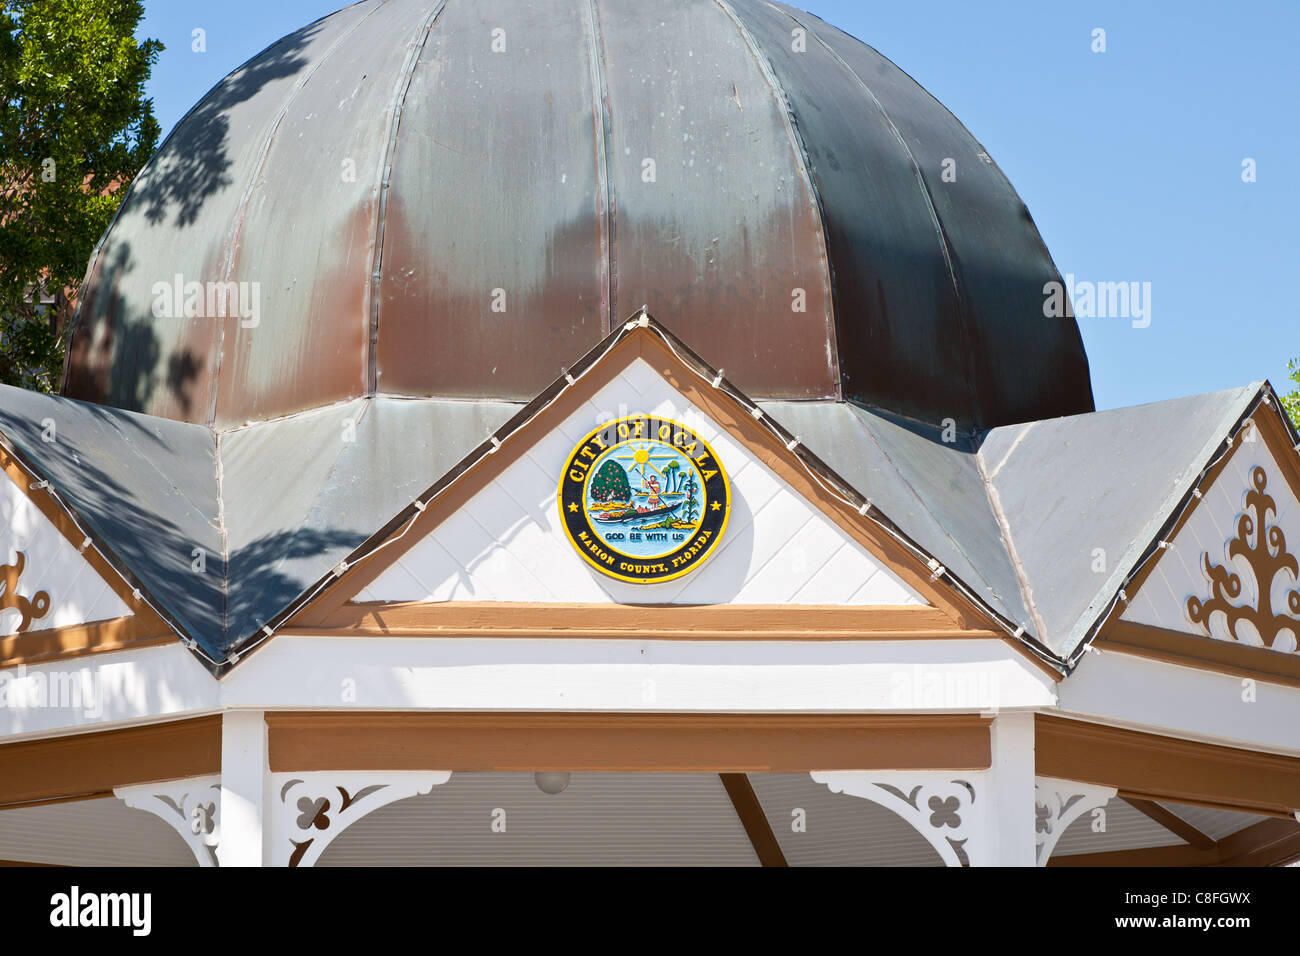 Top of gazebo on the downtown square showing the city seal of Ocala Florida Stock Photo